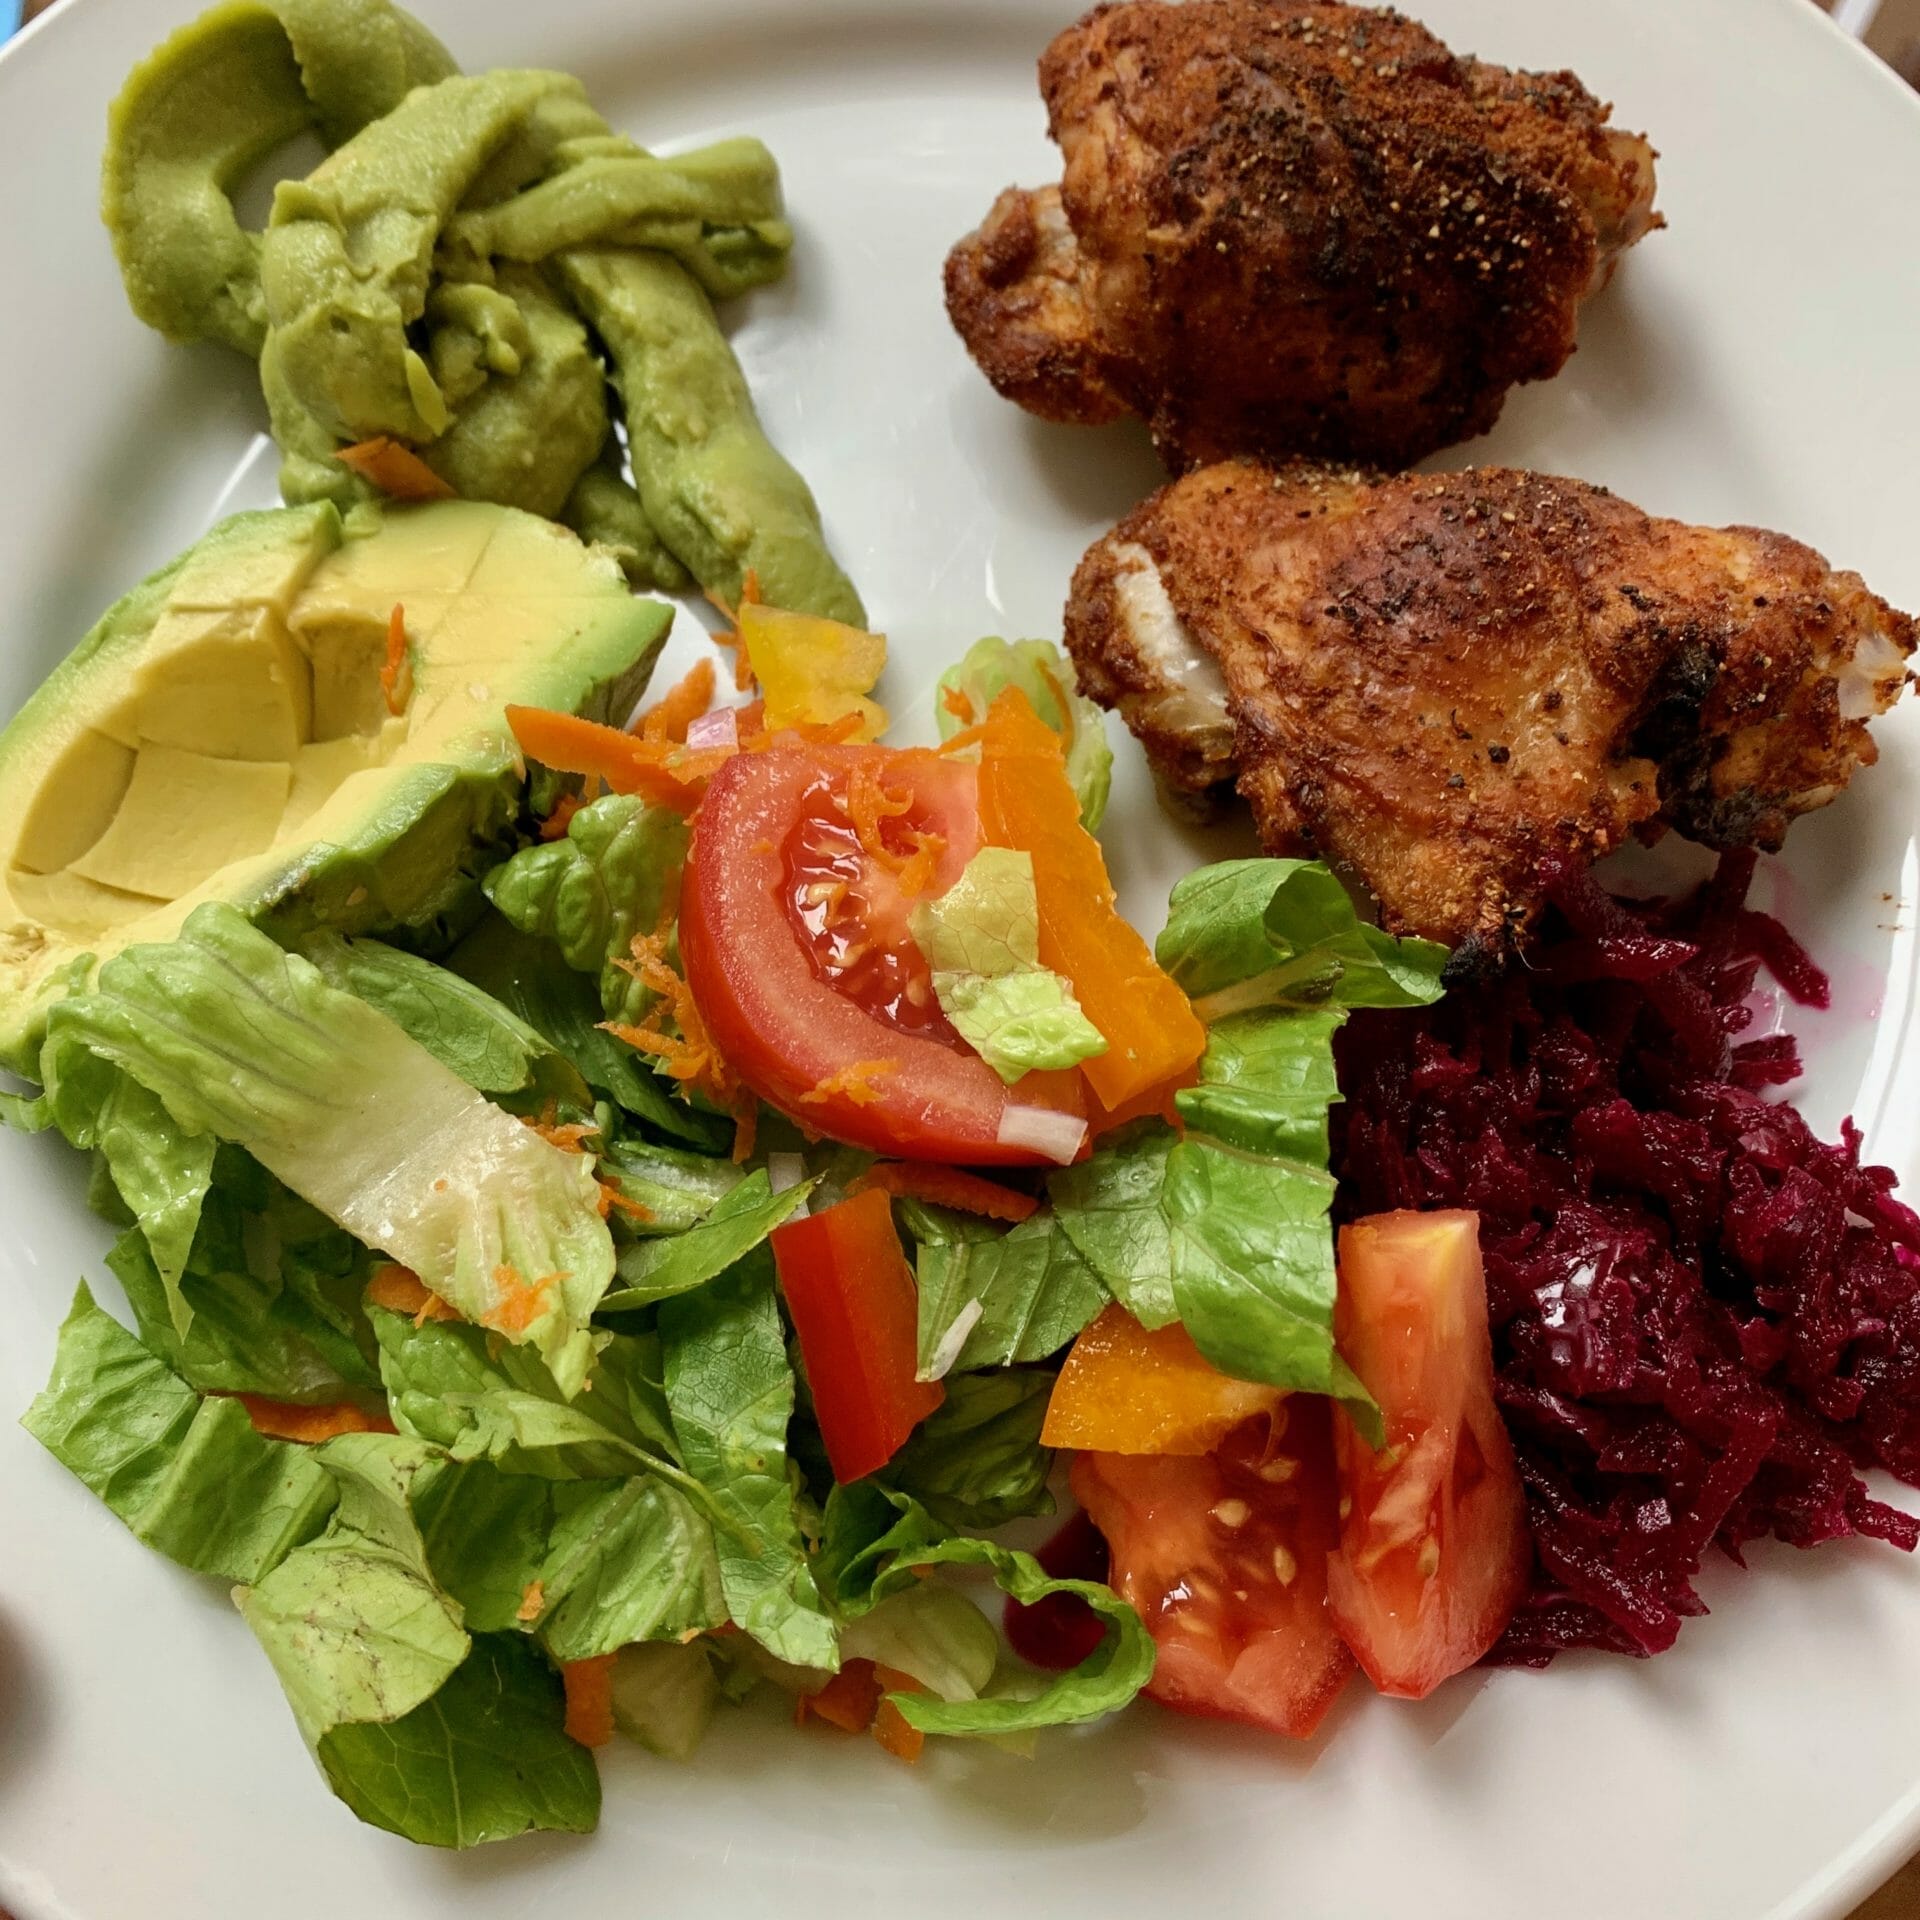 Fried chicken with lettuce, peppers, tomatoes, avocado, guacamole and fermented red beets